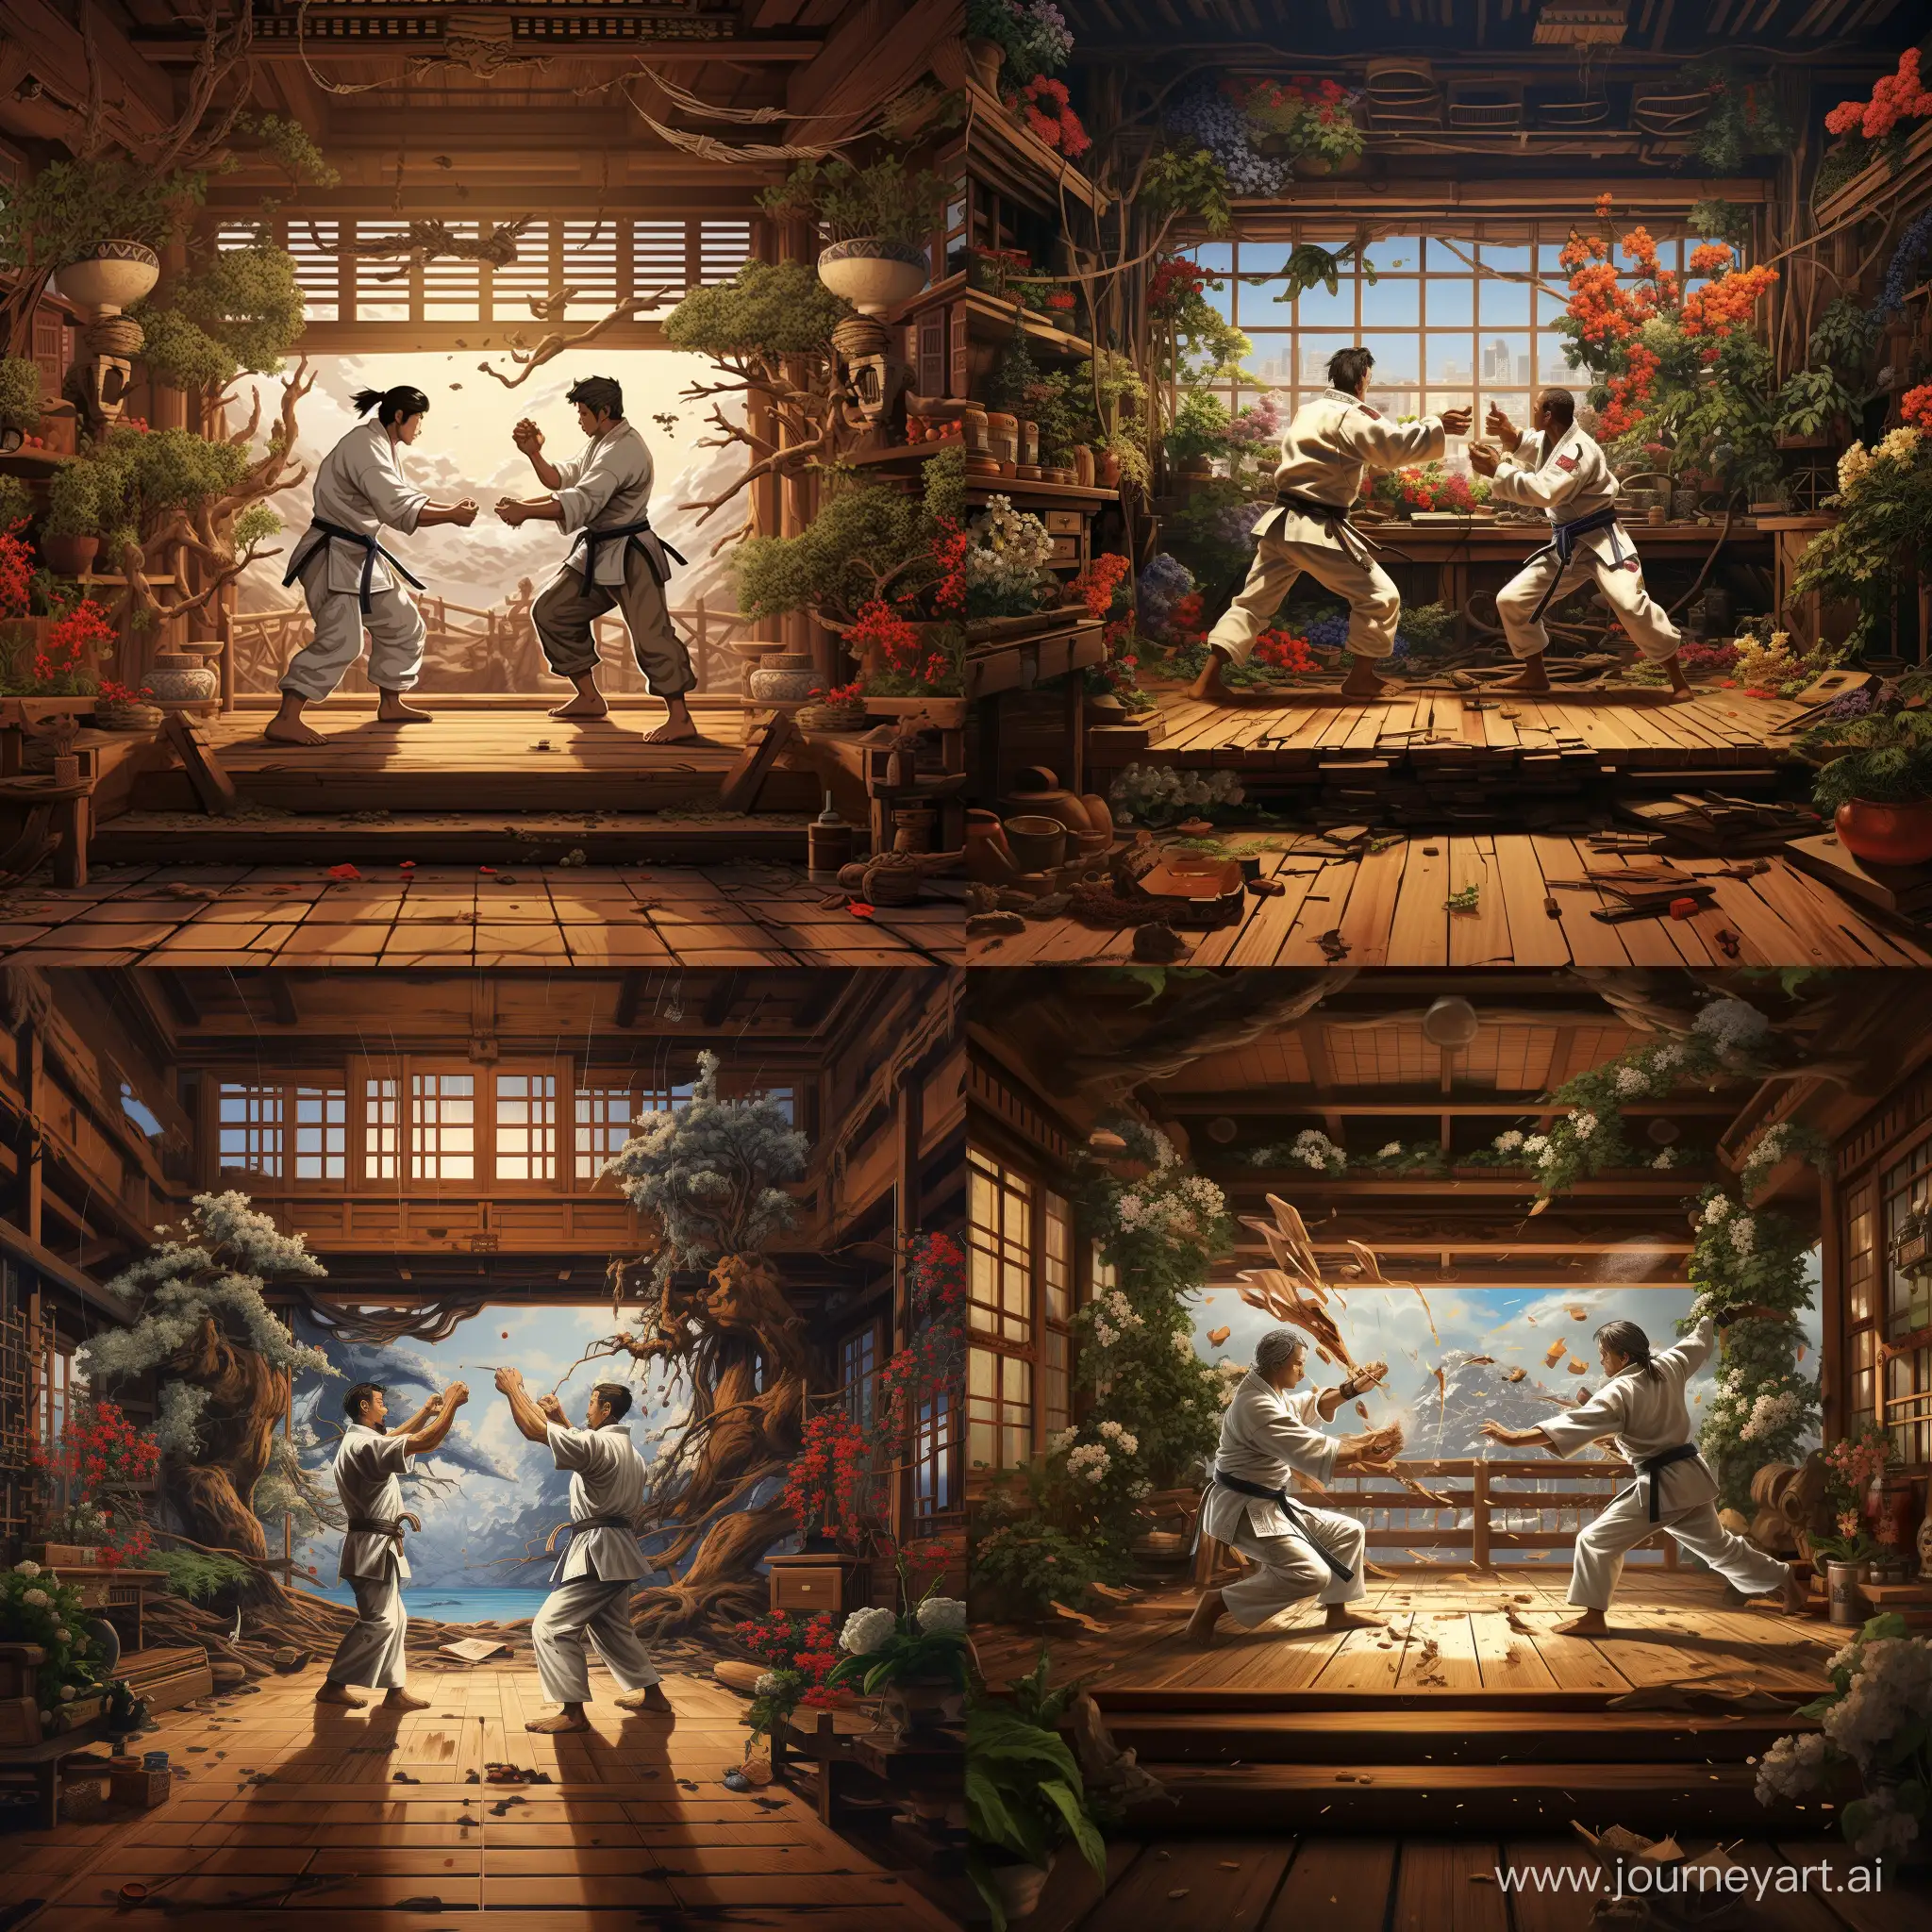 two karate fighters fighting in a Japanese-styled wooden room filled with bonsai plants and weapons